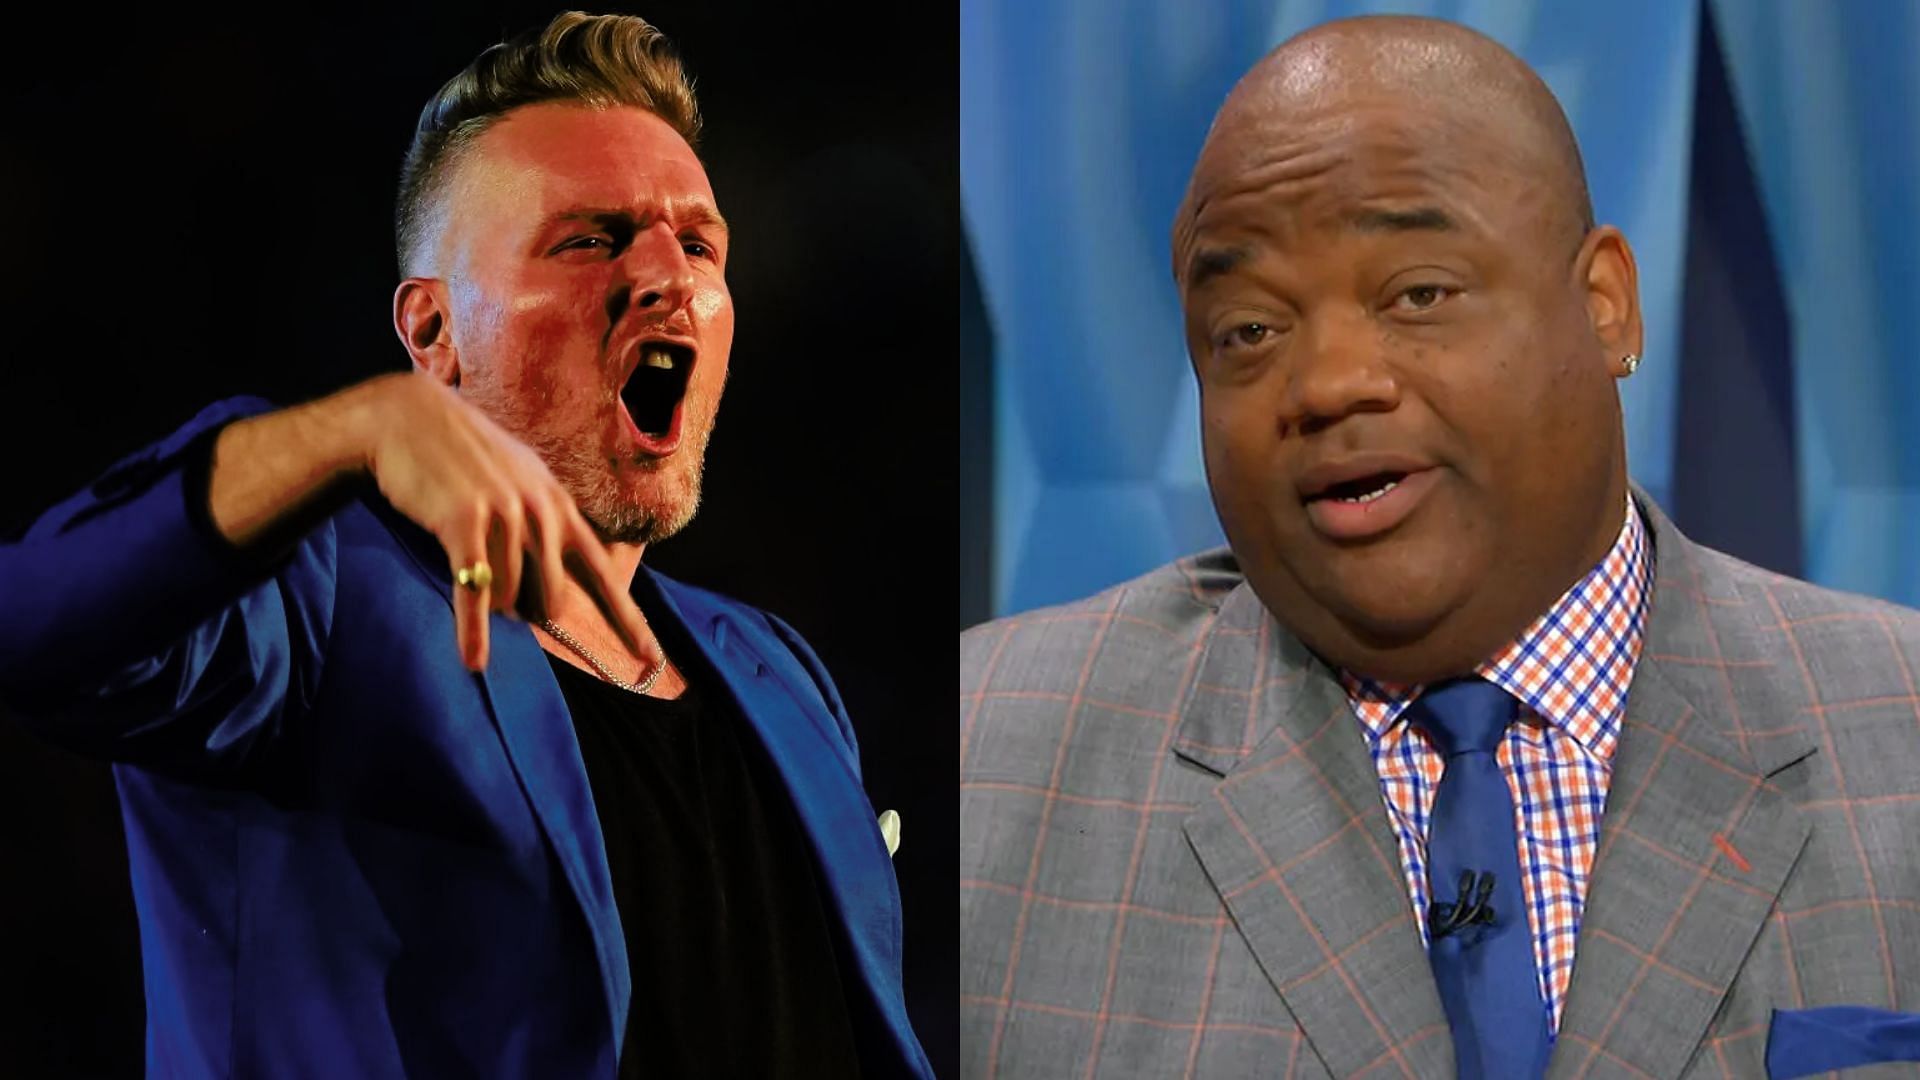 Sports media personality Jason Whitlock had some beef against Pat McAfee and his transfer to ESPN. (Image credit: Speak For Yourself/FOX Sports)